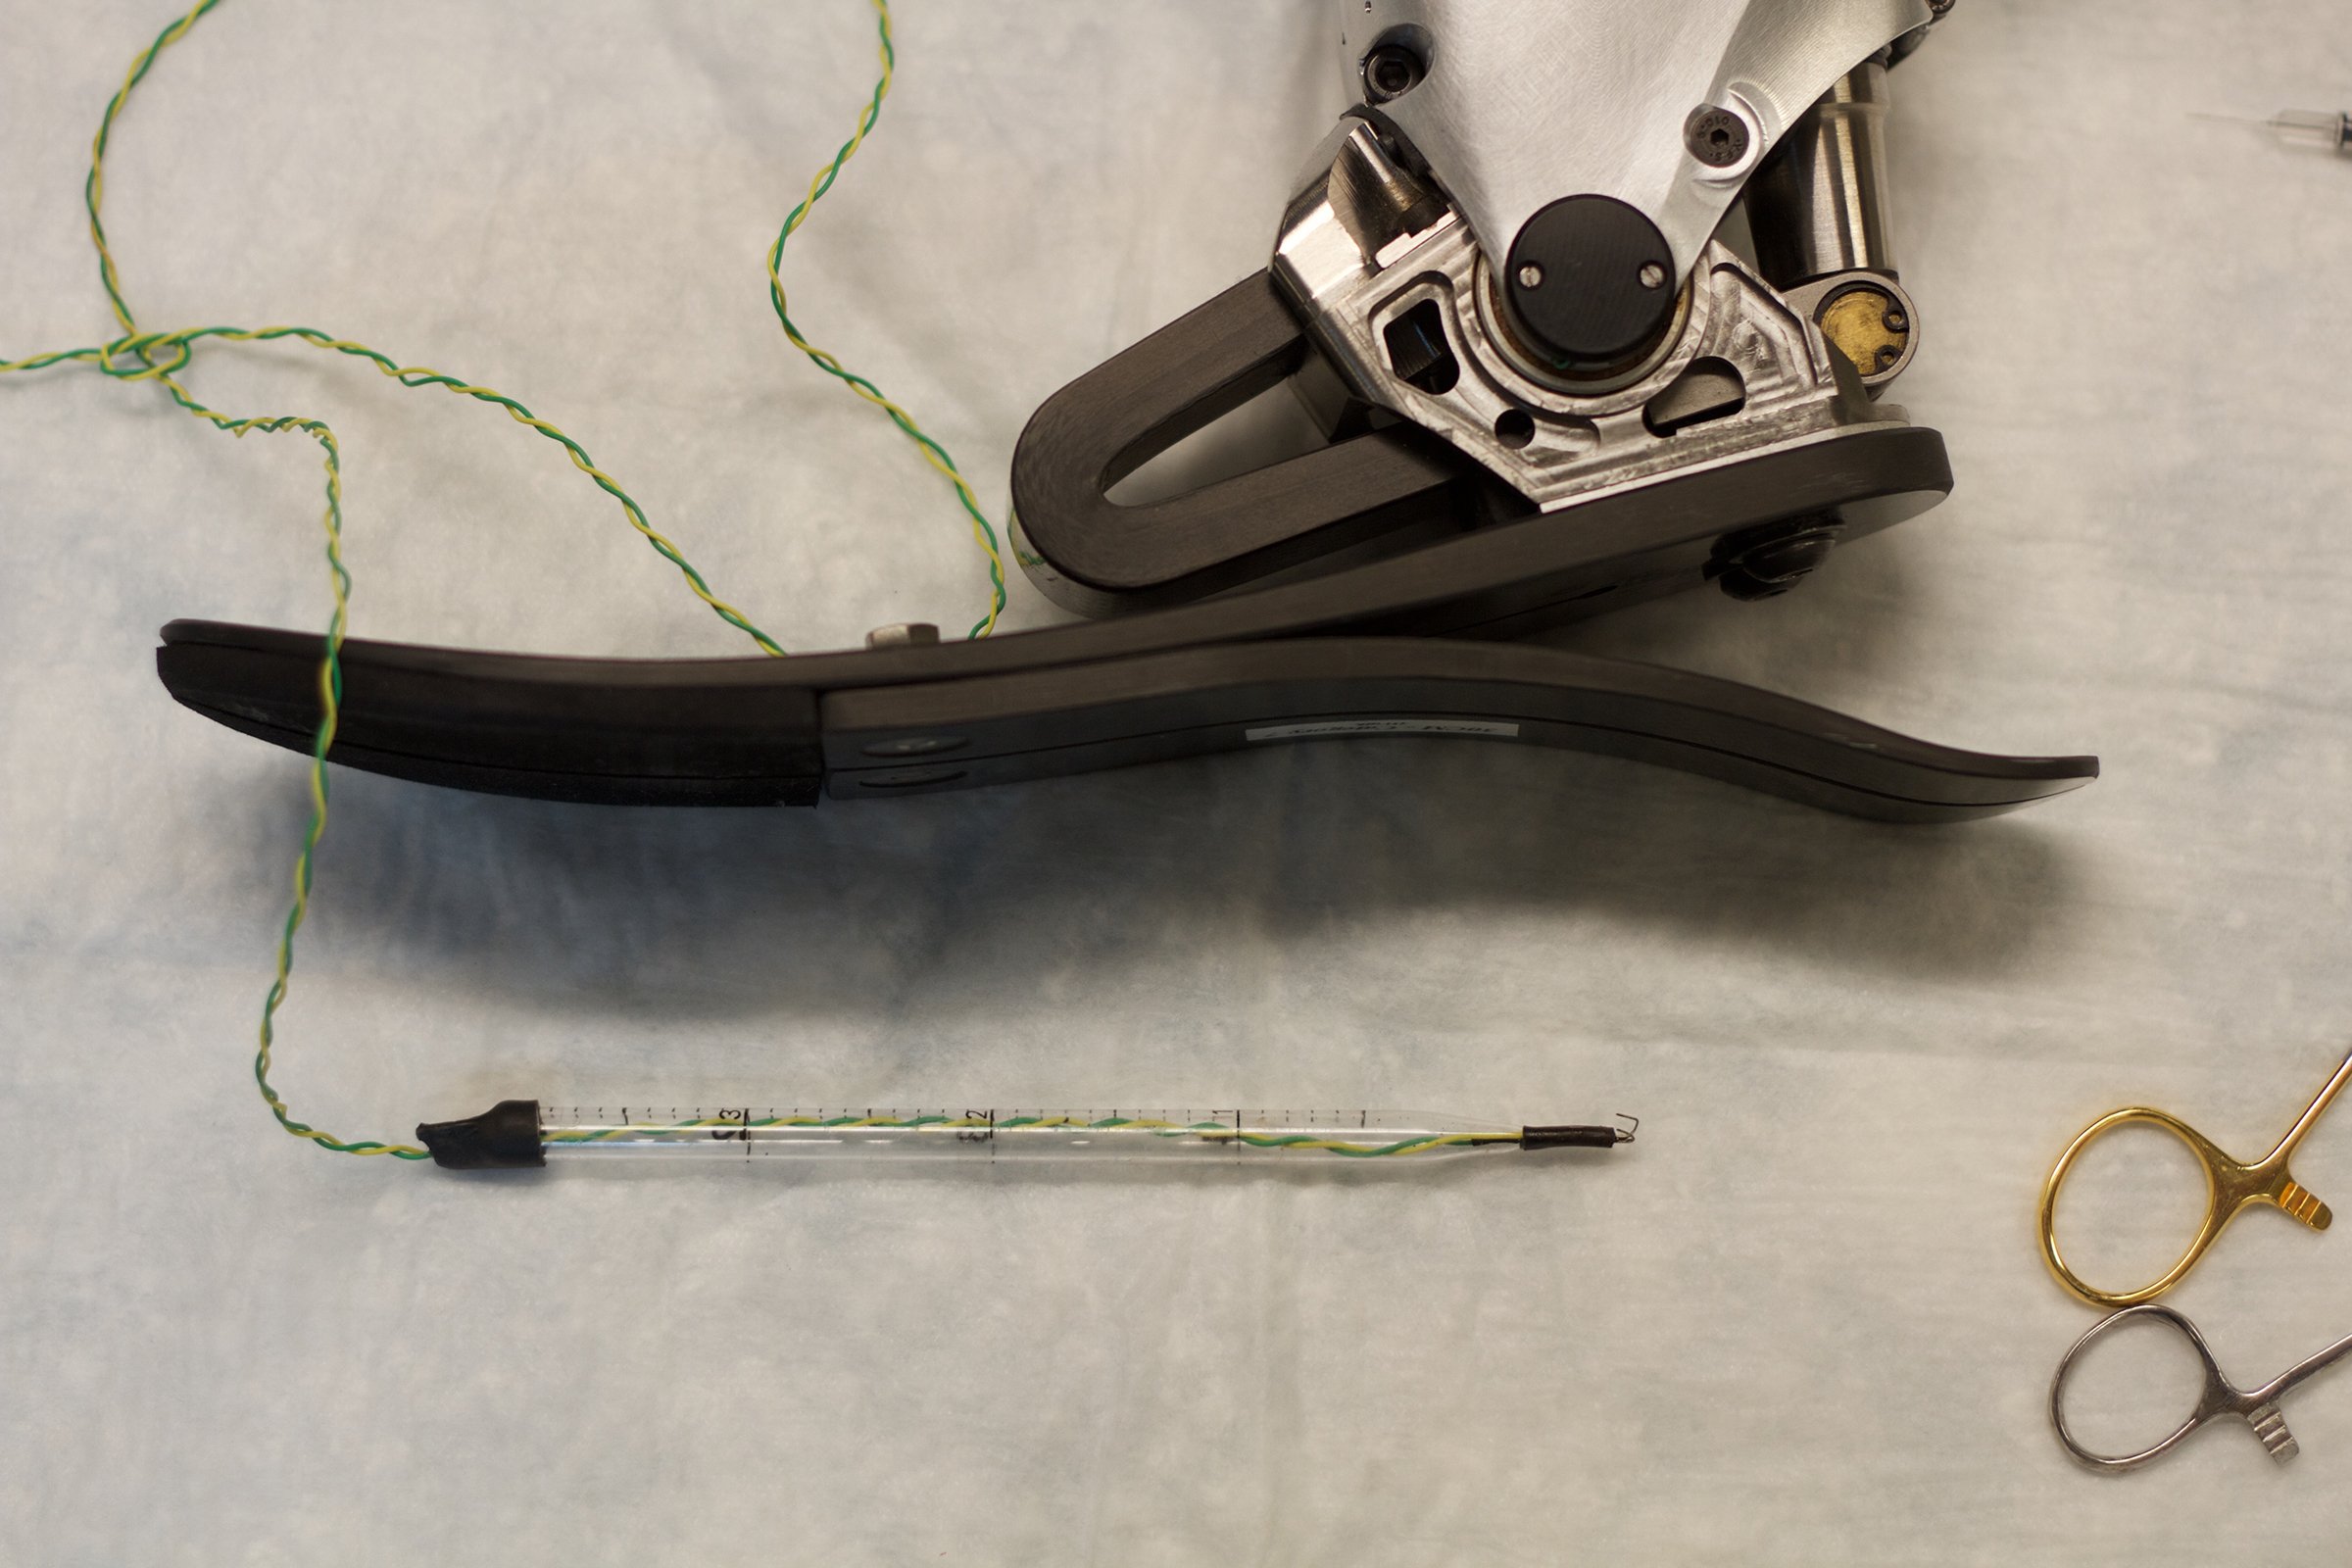 New Surgical Procedure May Make Prostheses Feel More Natural